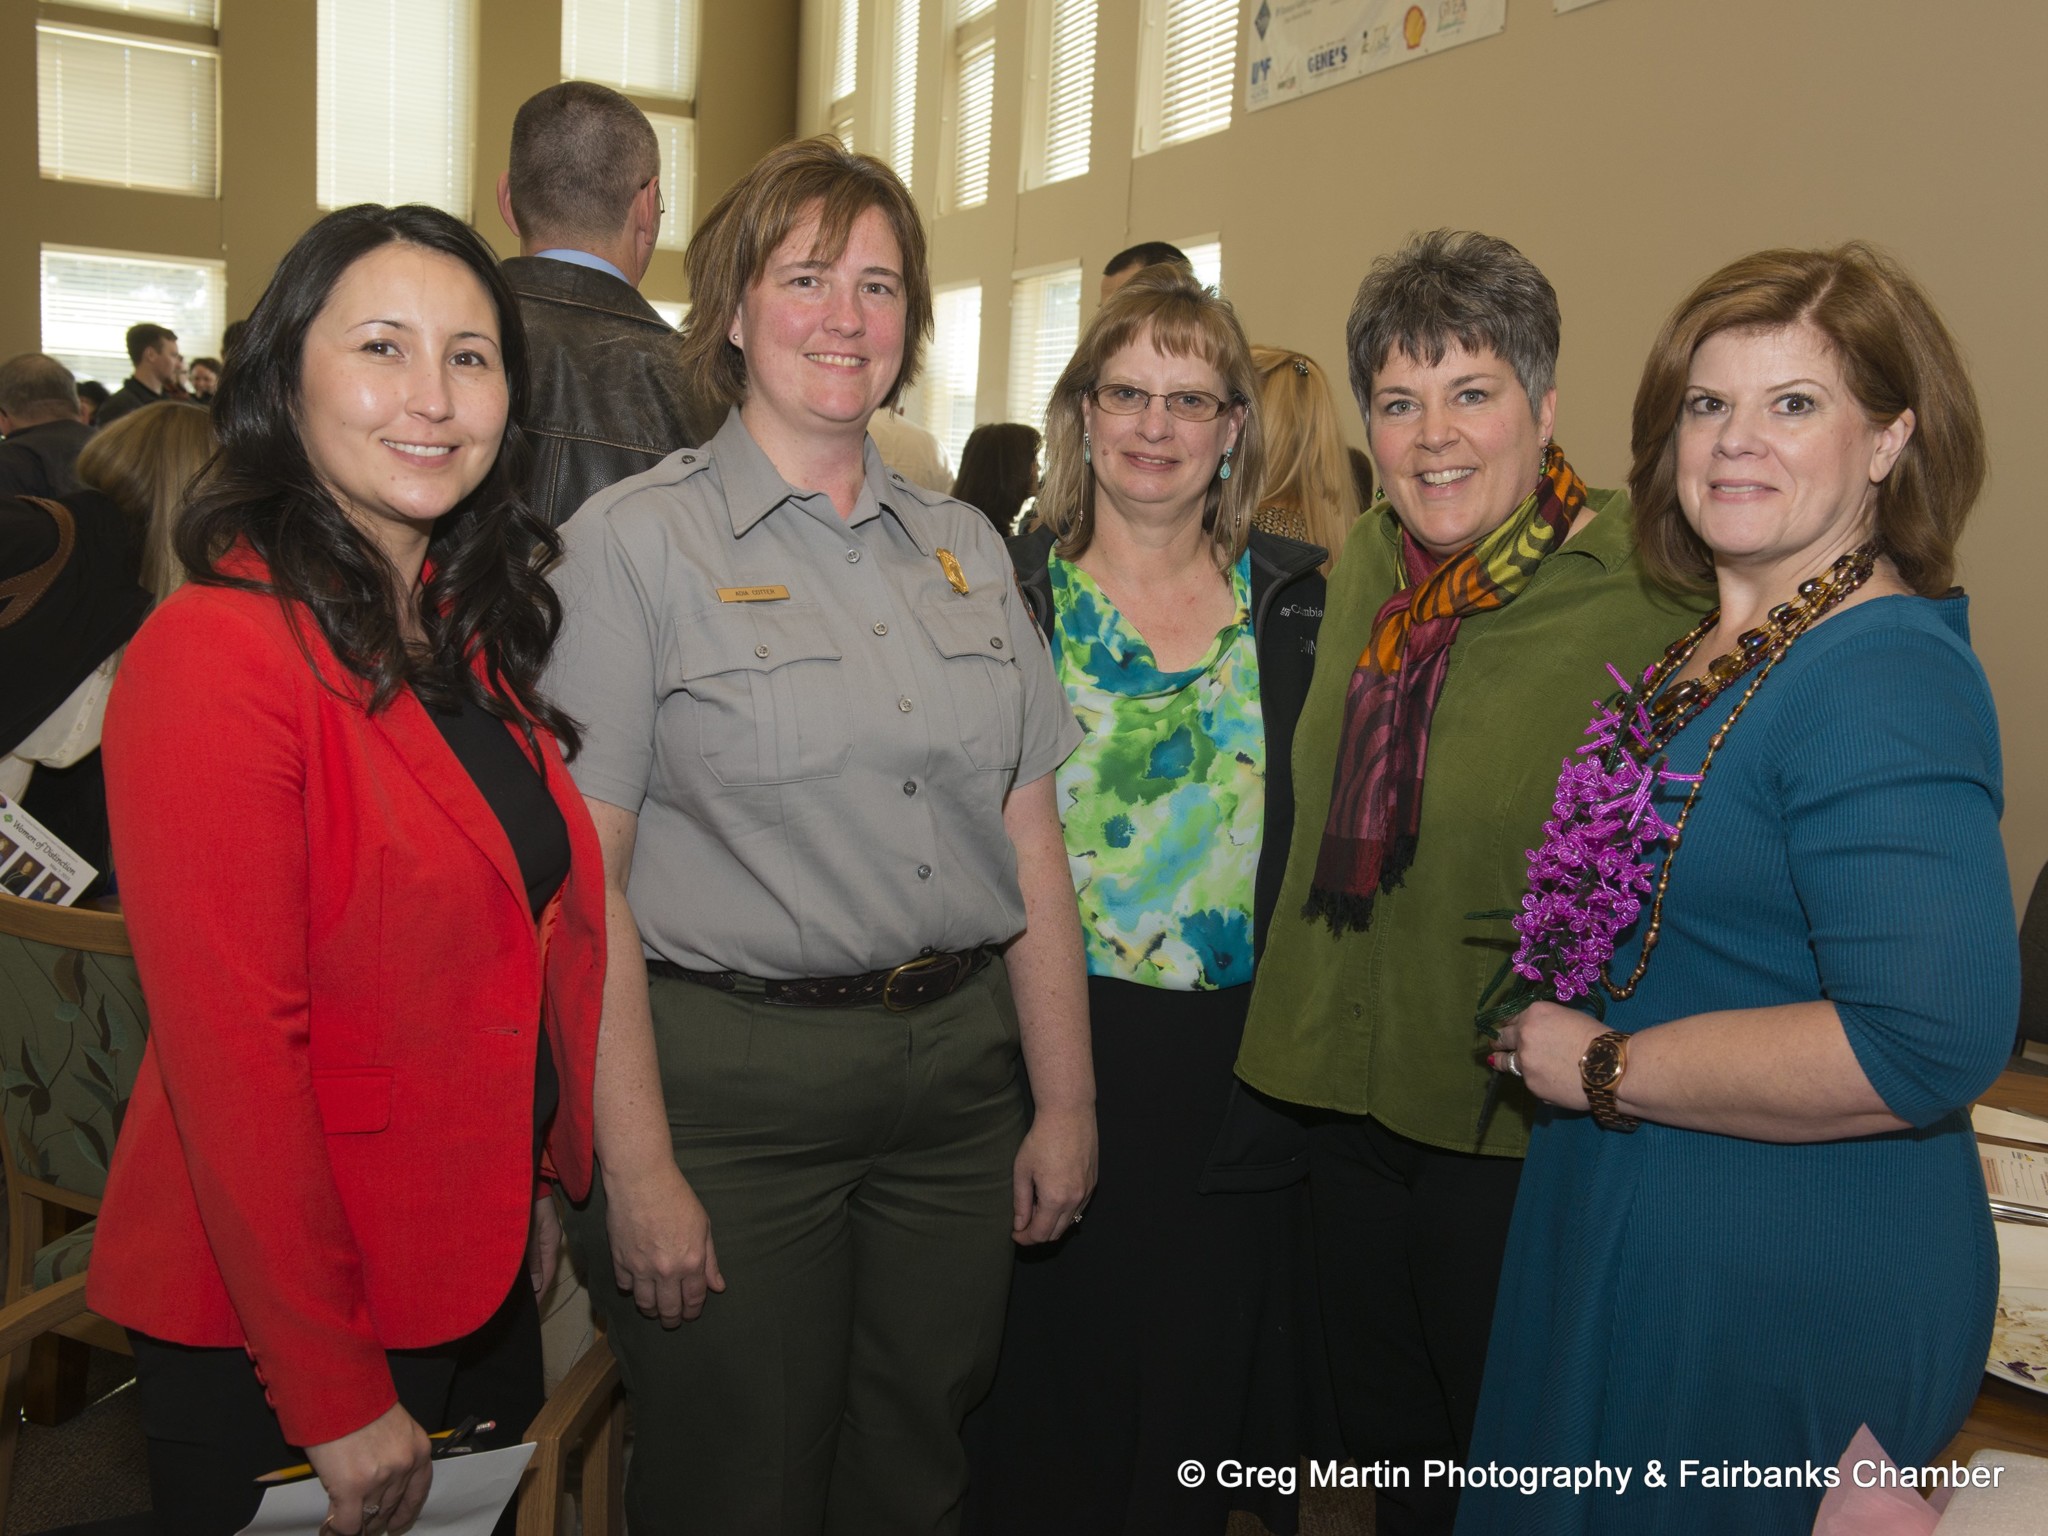 Pictured here (l to r) are Tiffany Simmons, NPS employee Adia Cotter, MTCVC board member Dawn Murphy, Executive Director Cindy Schumaker, and ExxonMobil's Kimberly Jordan.